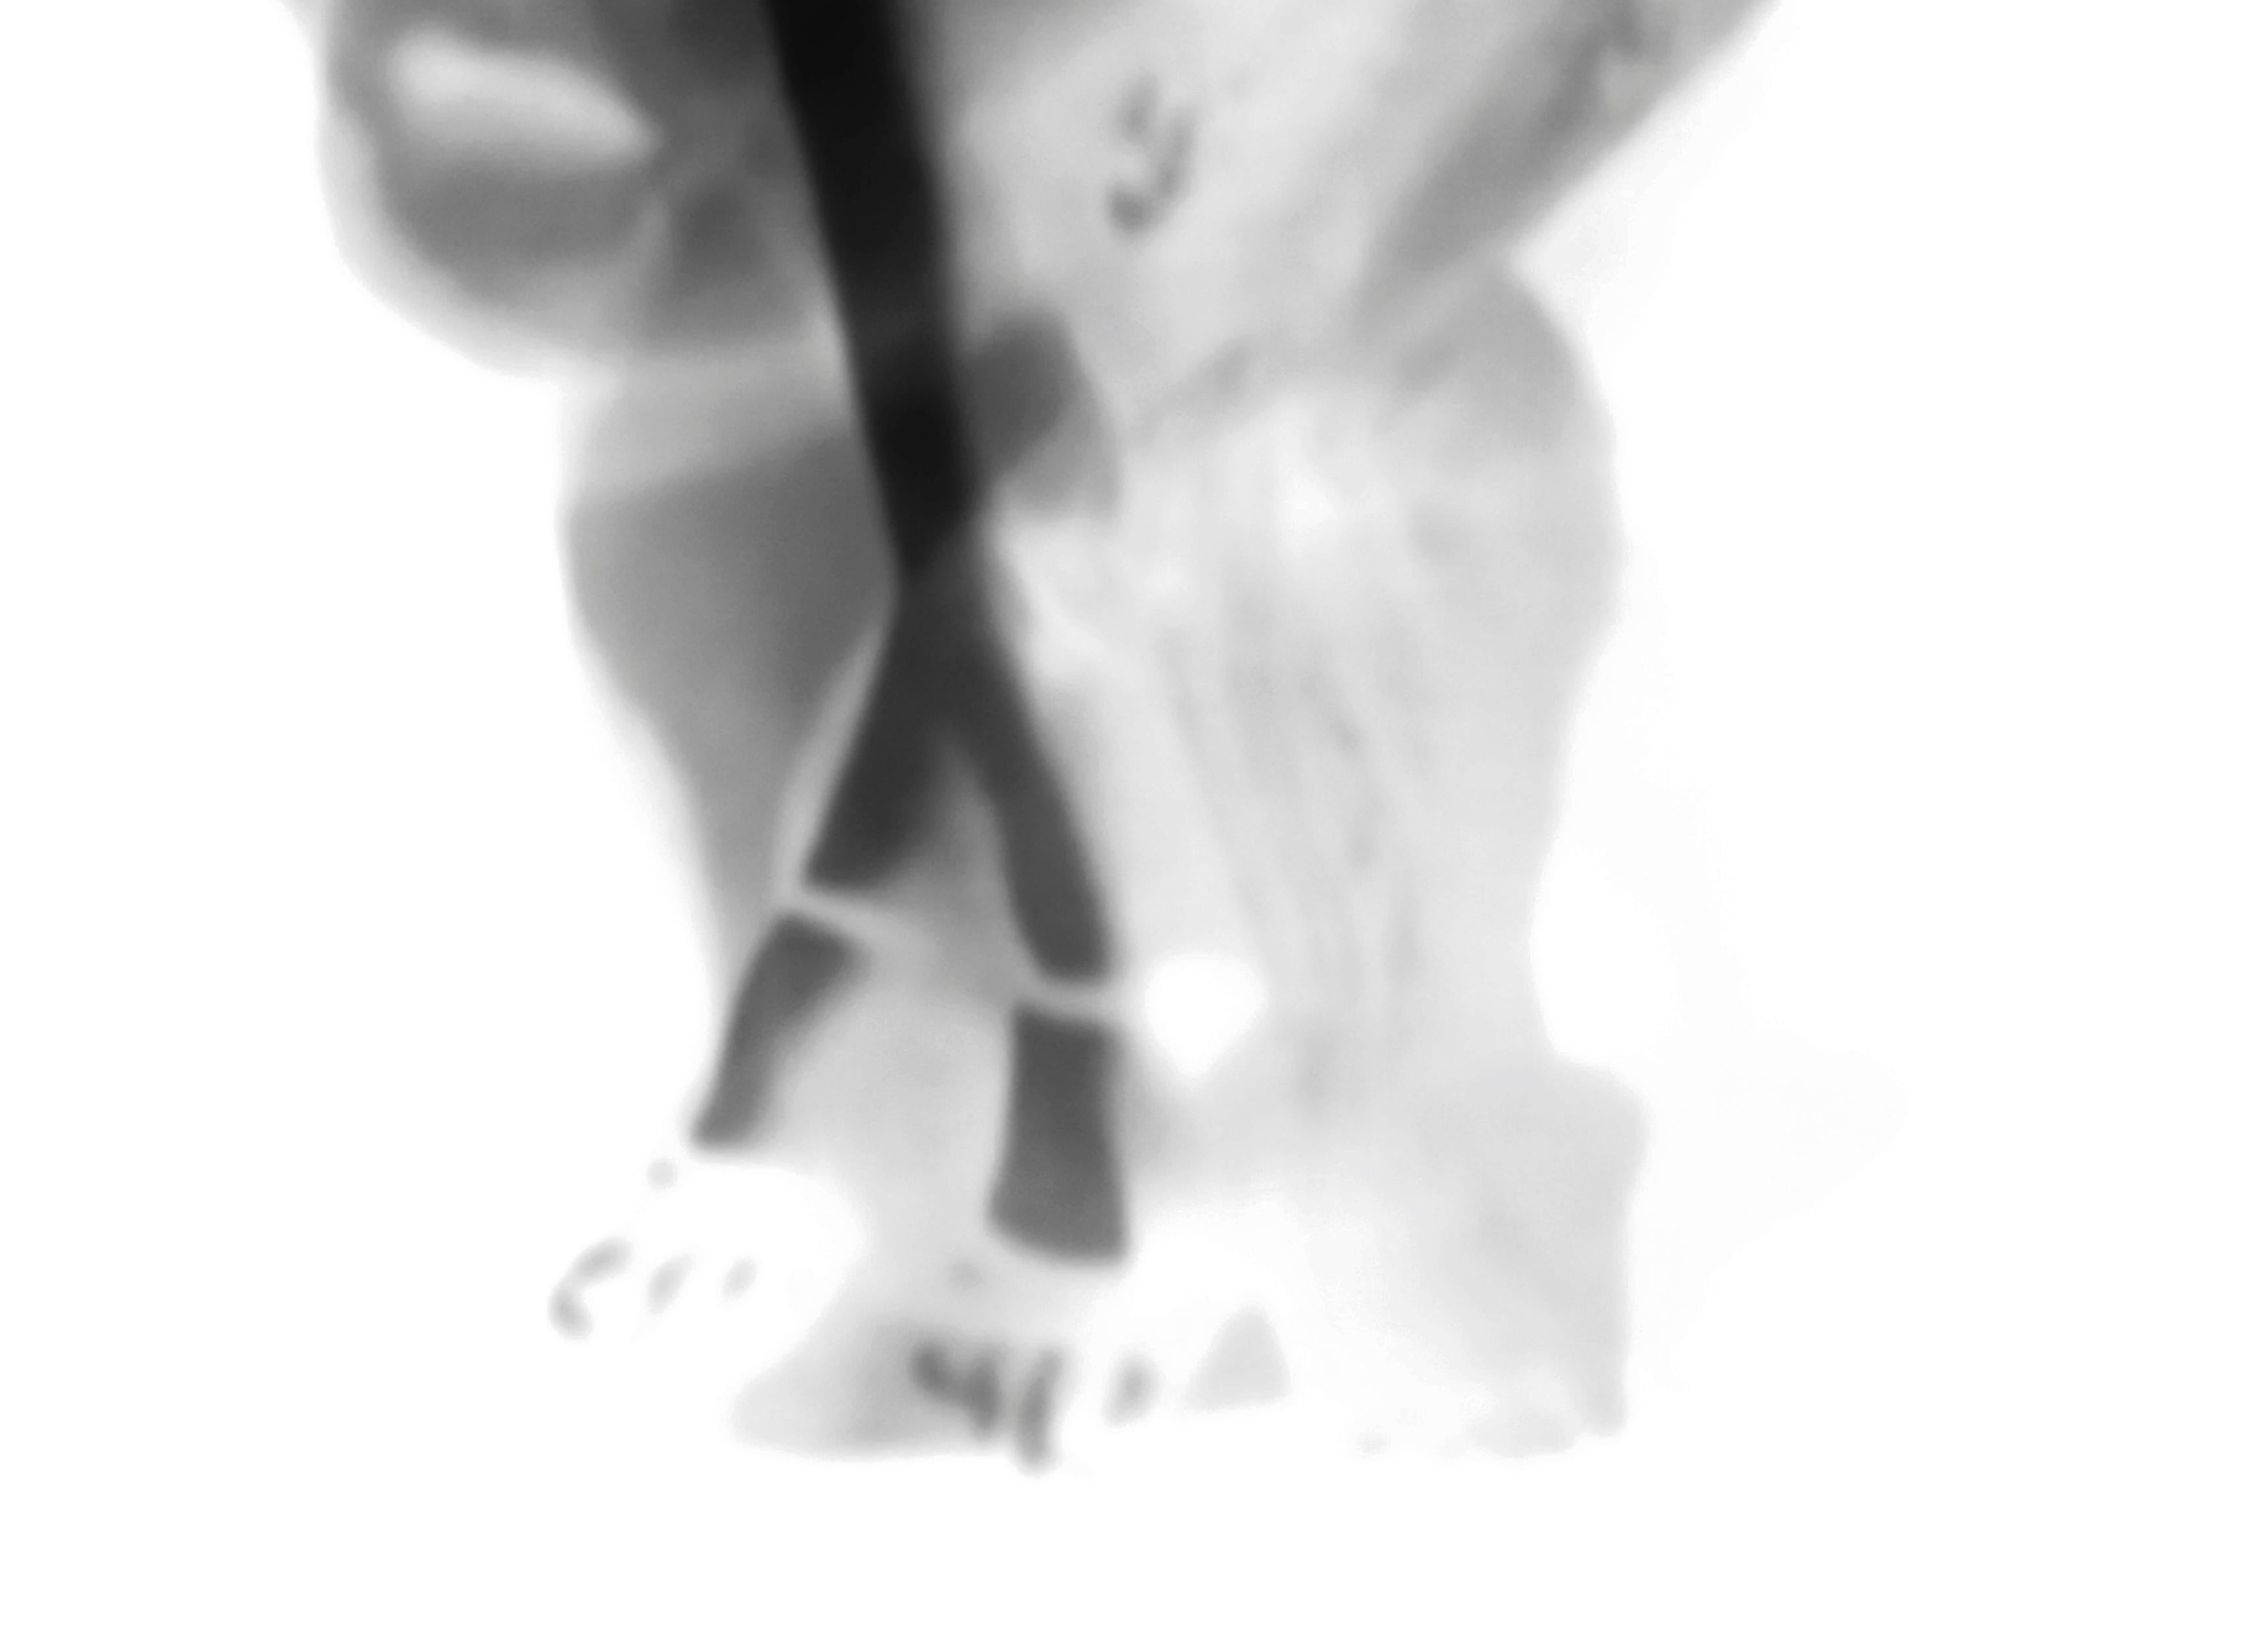 Div-Ine III. Limited edition B&W Abstract Figurative Photographs  - Gray Abstract Photograph by Magda Von Hanau